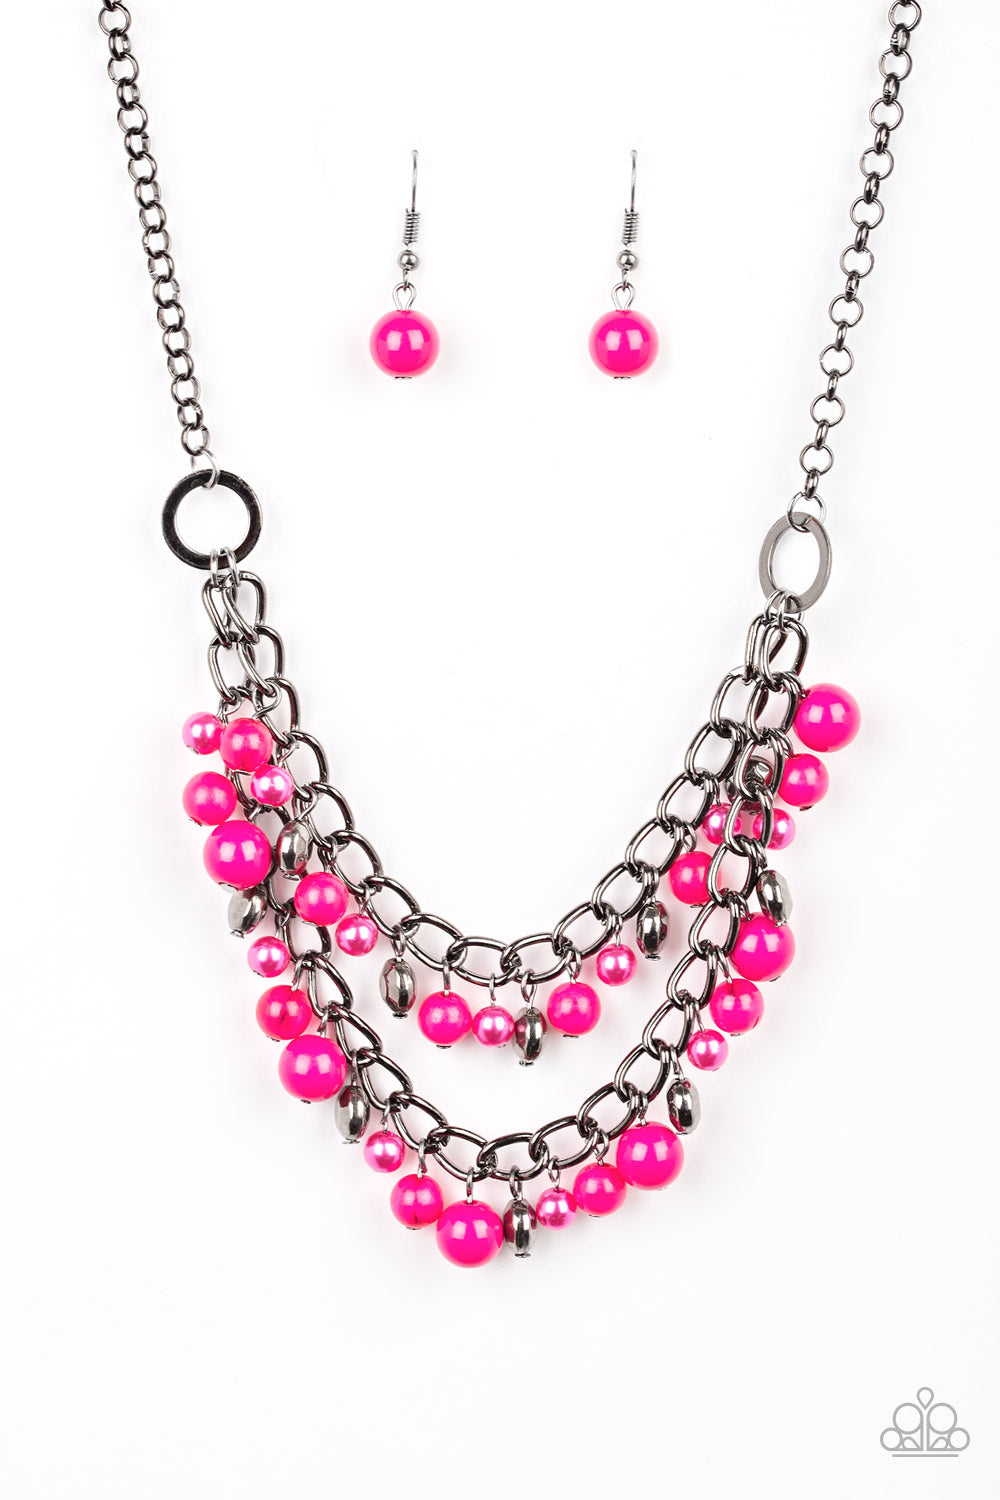 five-dollar-jewelry-watch-me-now-pink-necklace-paparazzi-accessories